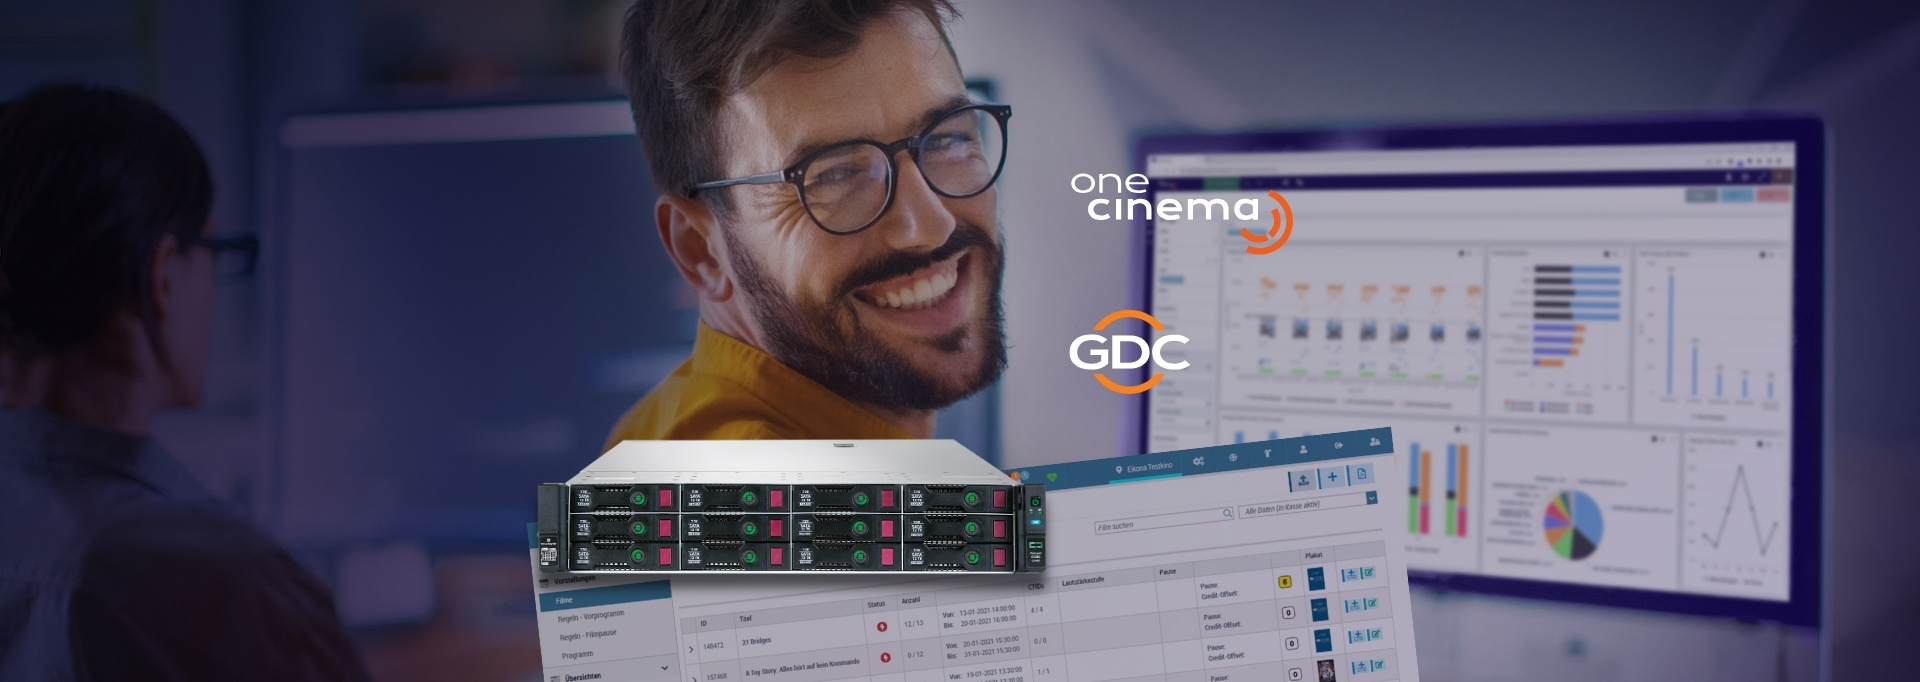 GDC Technology and OneCinema complete integration of centralized playback technology